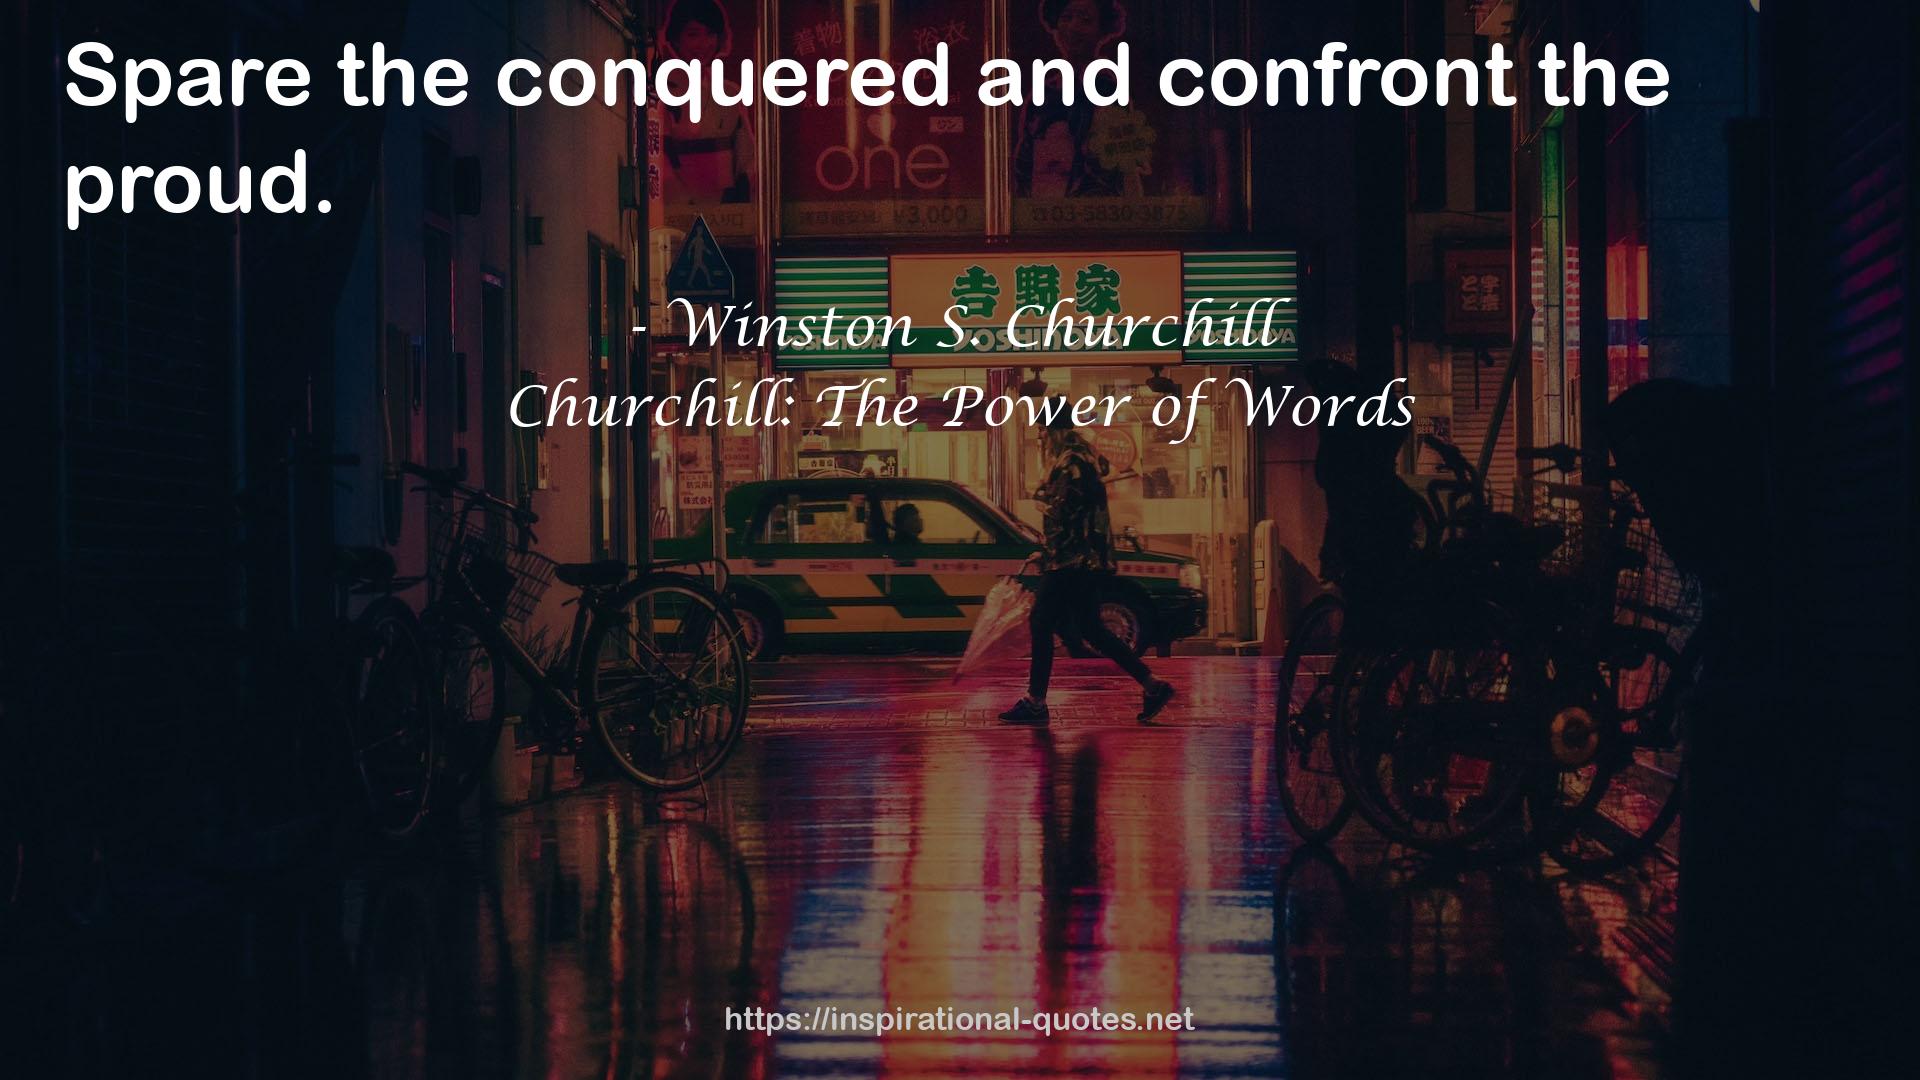 Churchill: The Power of Words QUOTES